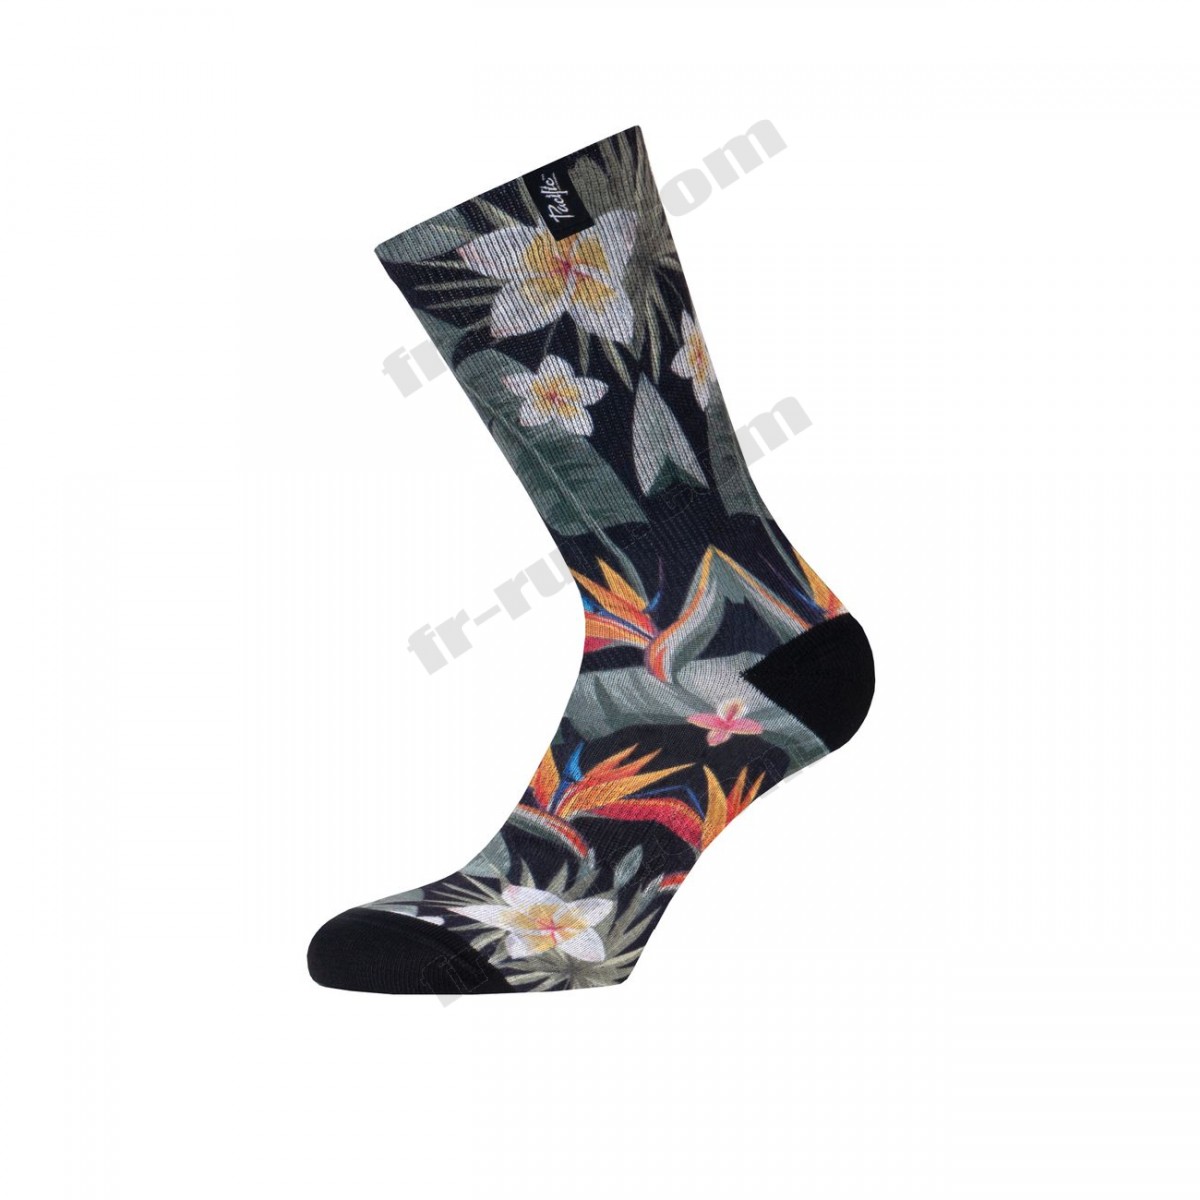 Pacific And Co/running adulte PACIFIC and CO MALAY Unisex Performance Socks ◇◇◇ Pas Cher Du Tout - -0